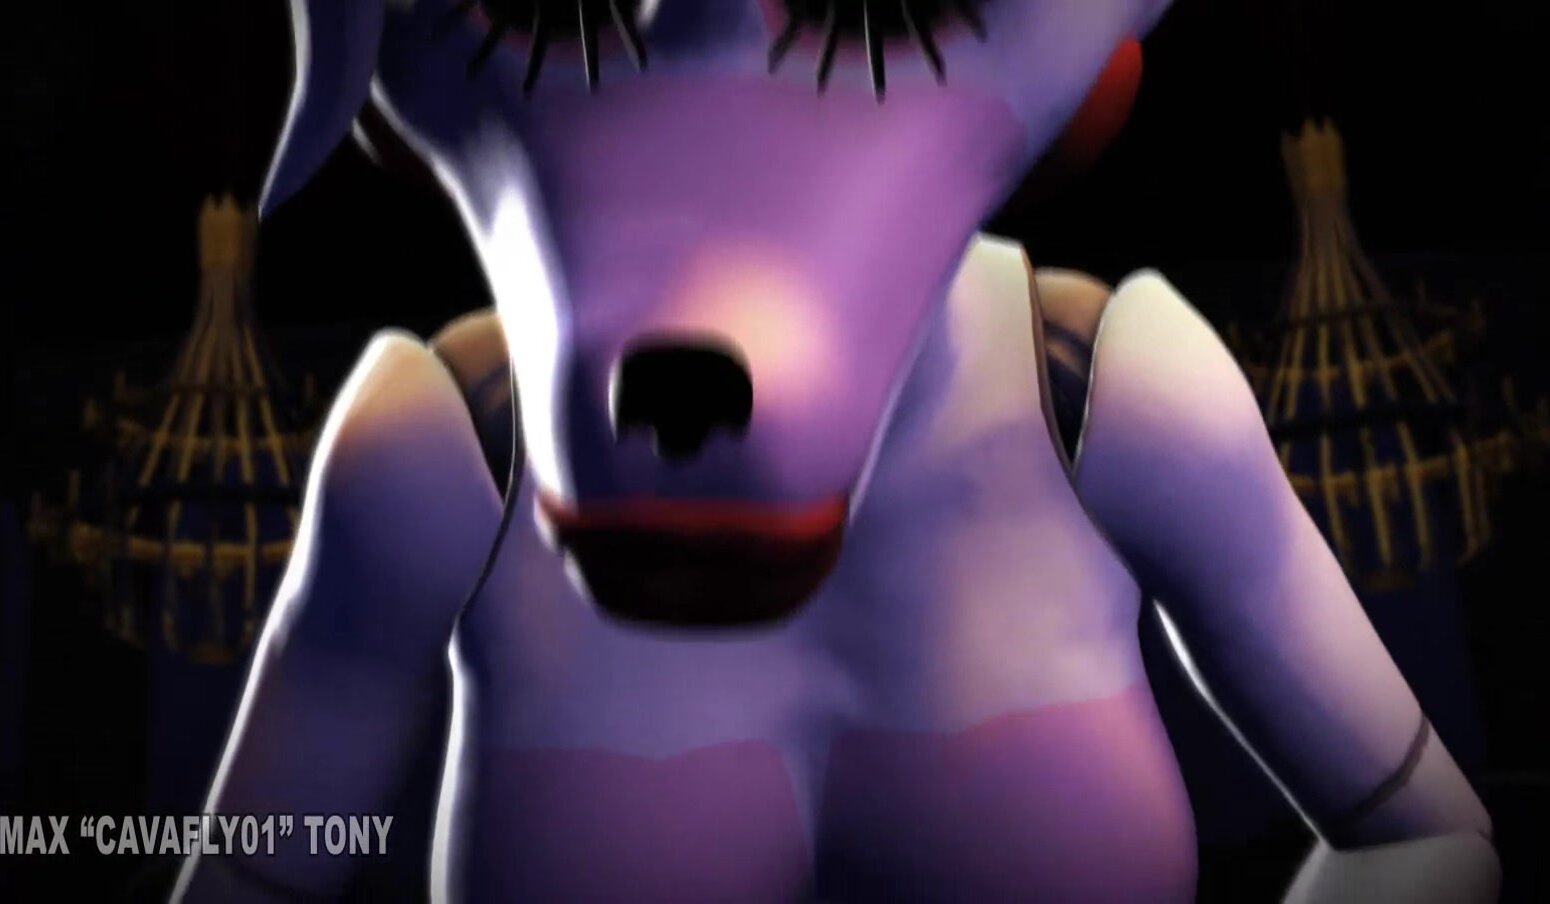 Mangle get's Fucked by you